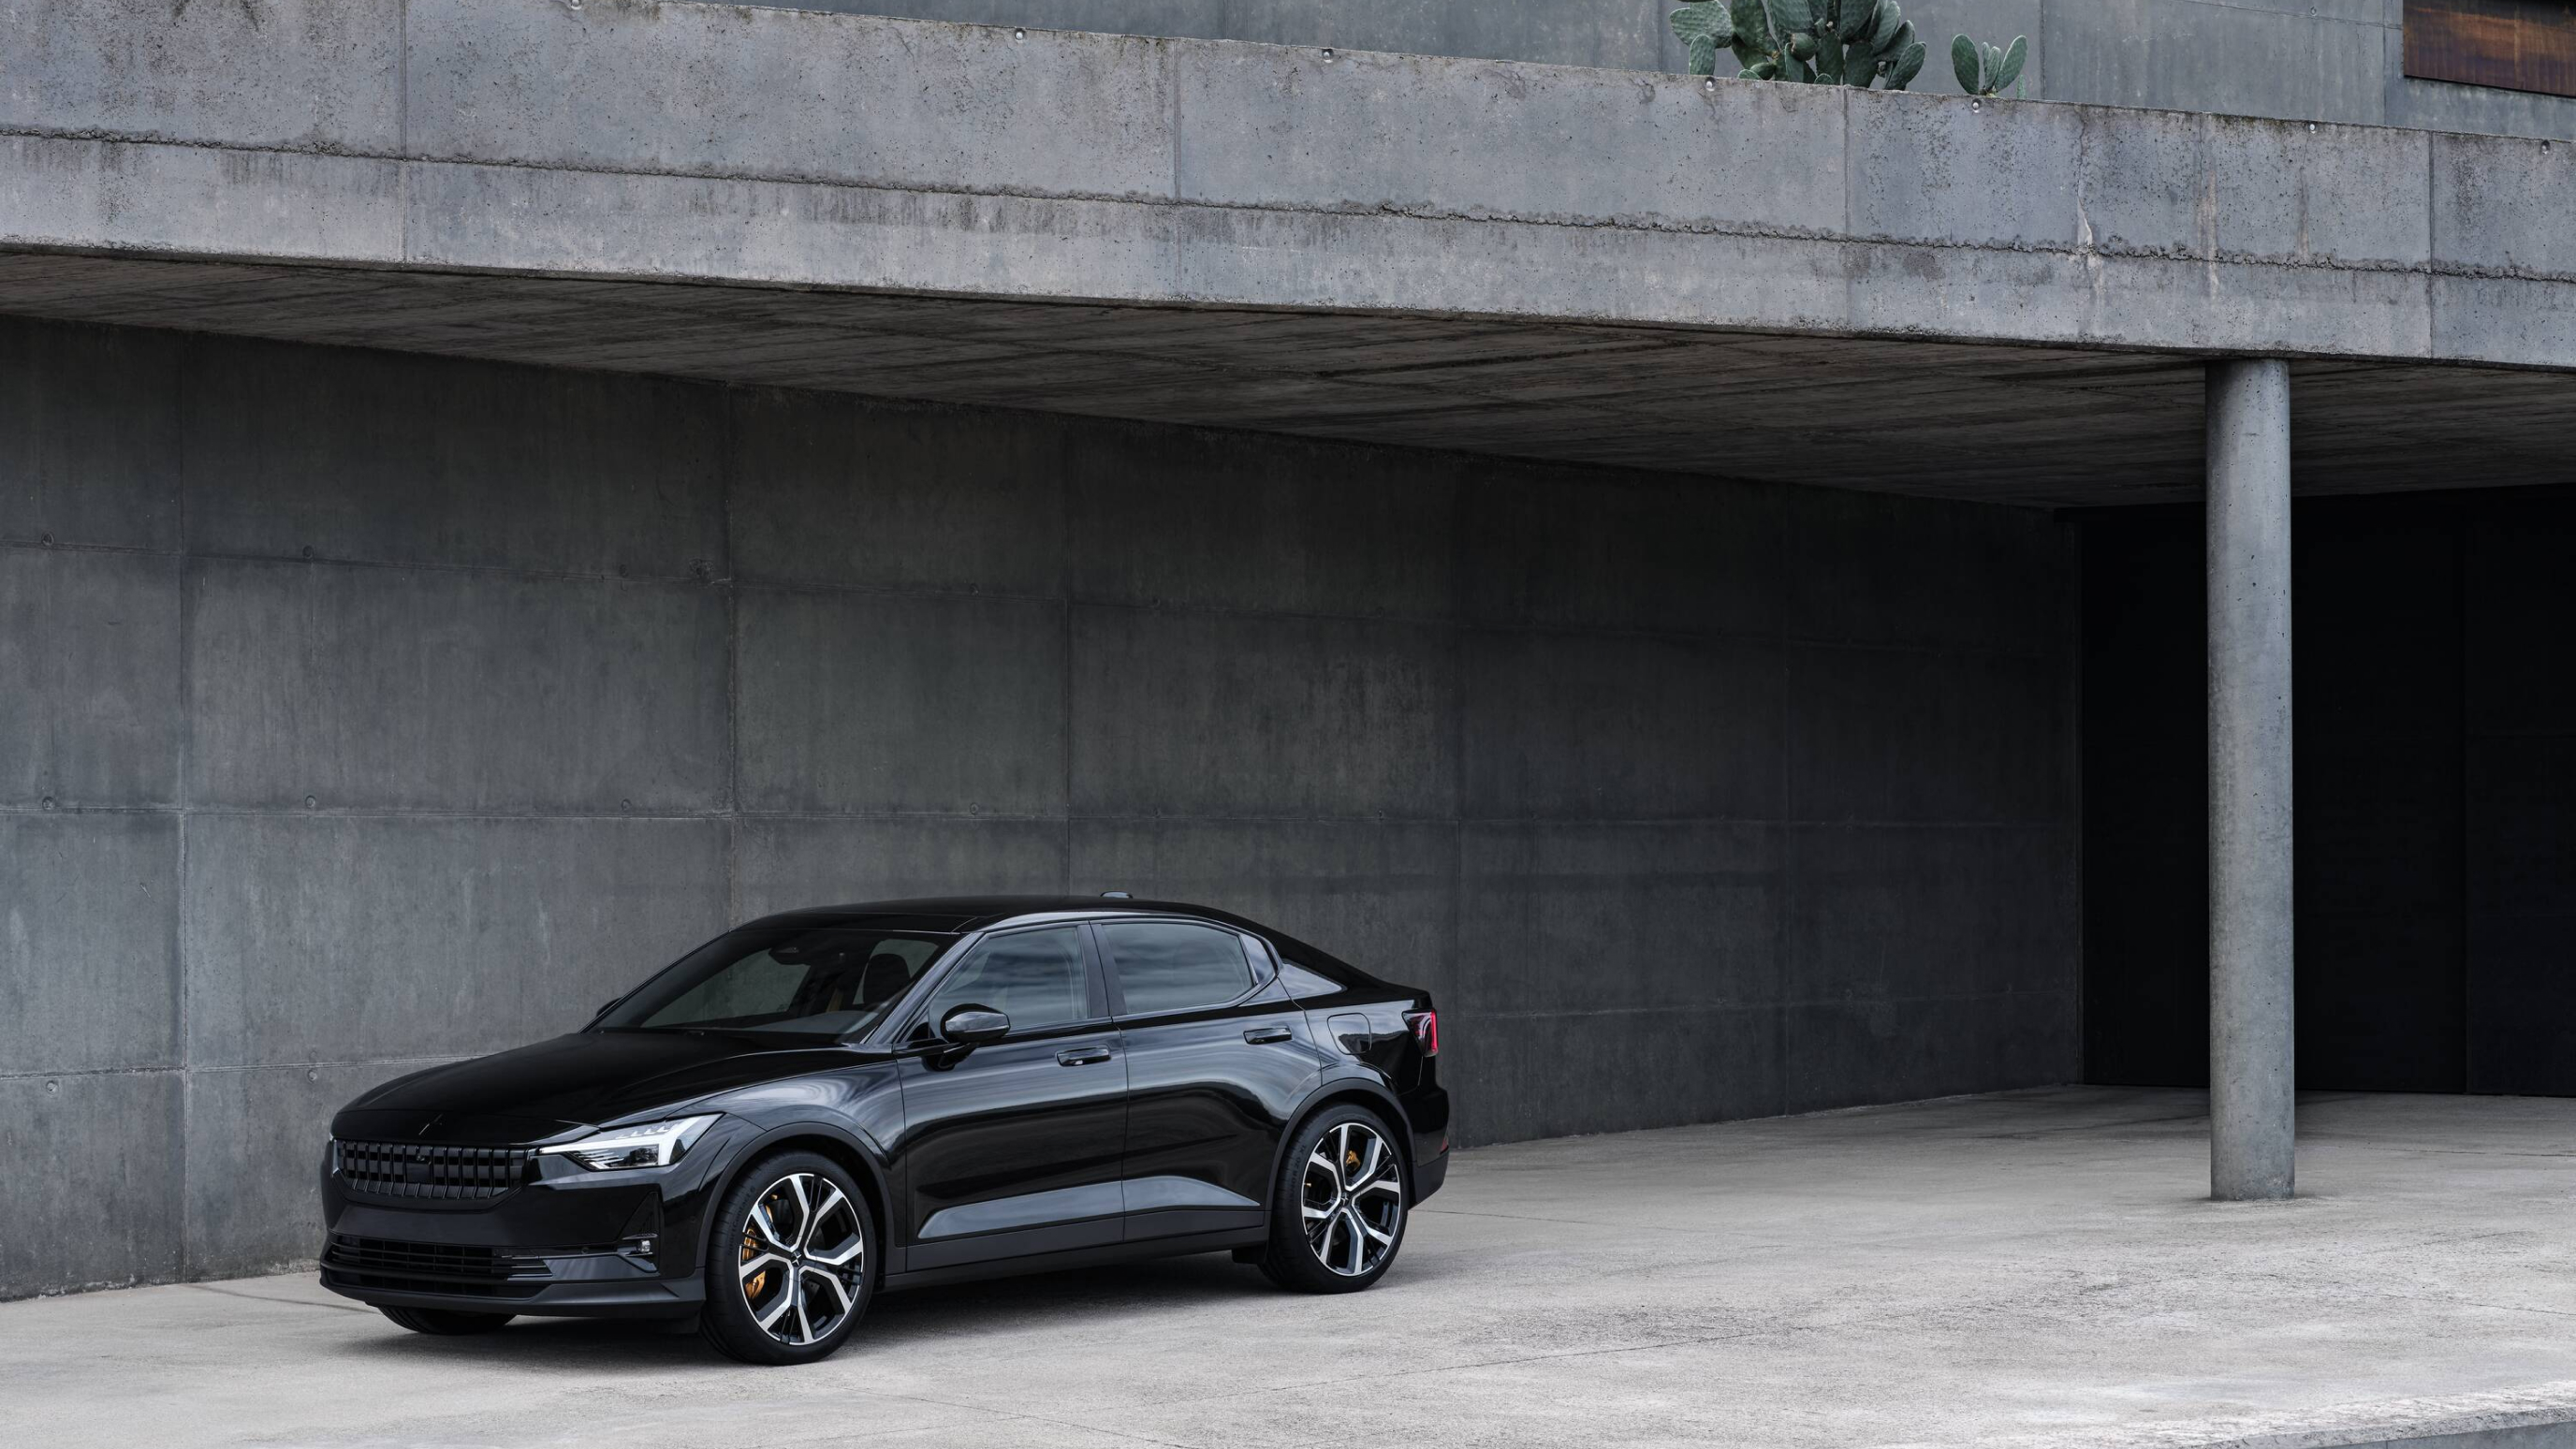 Black Polestar 2 parked against a cement-like building